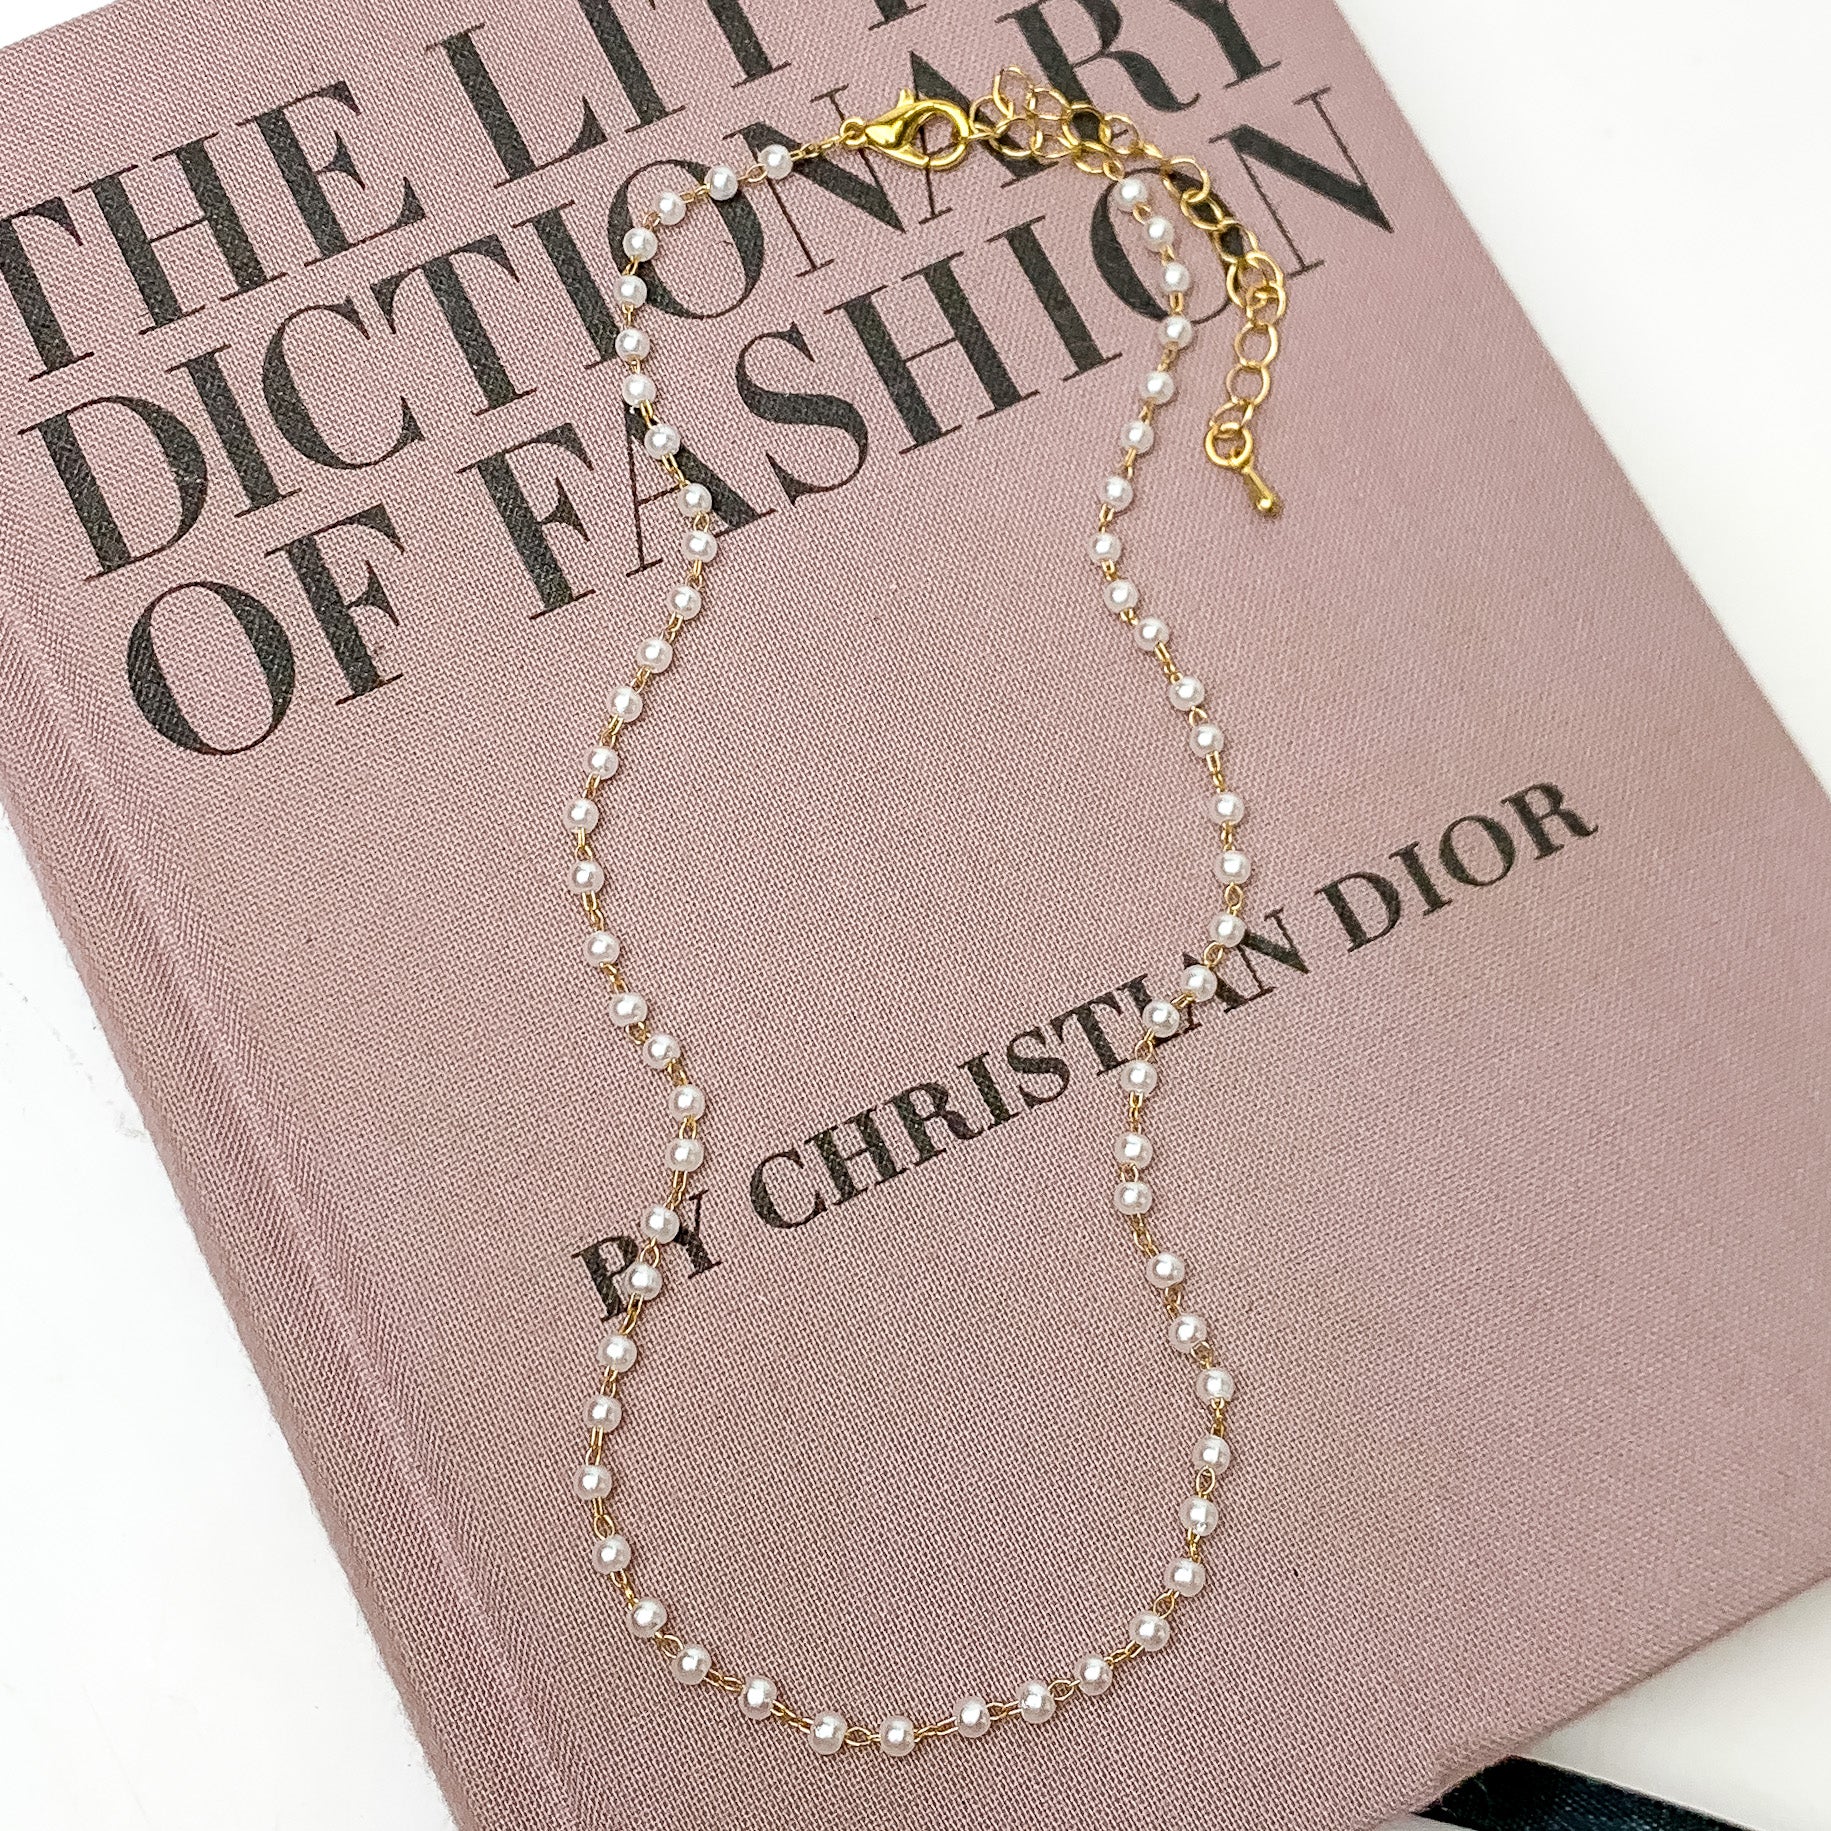 Pearl Linked Necklace in Gold Tone. Pictured on a white background with the necklace laying on a pink book.